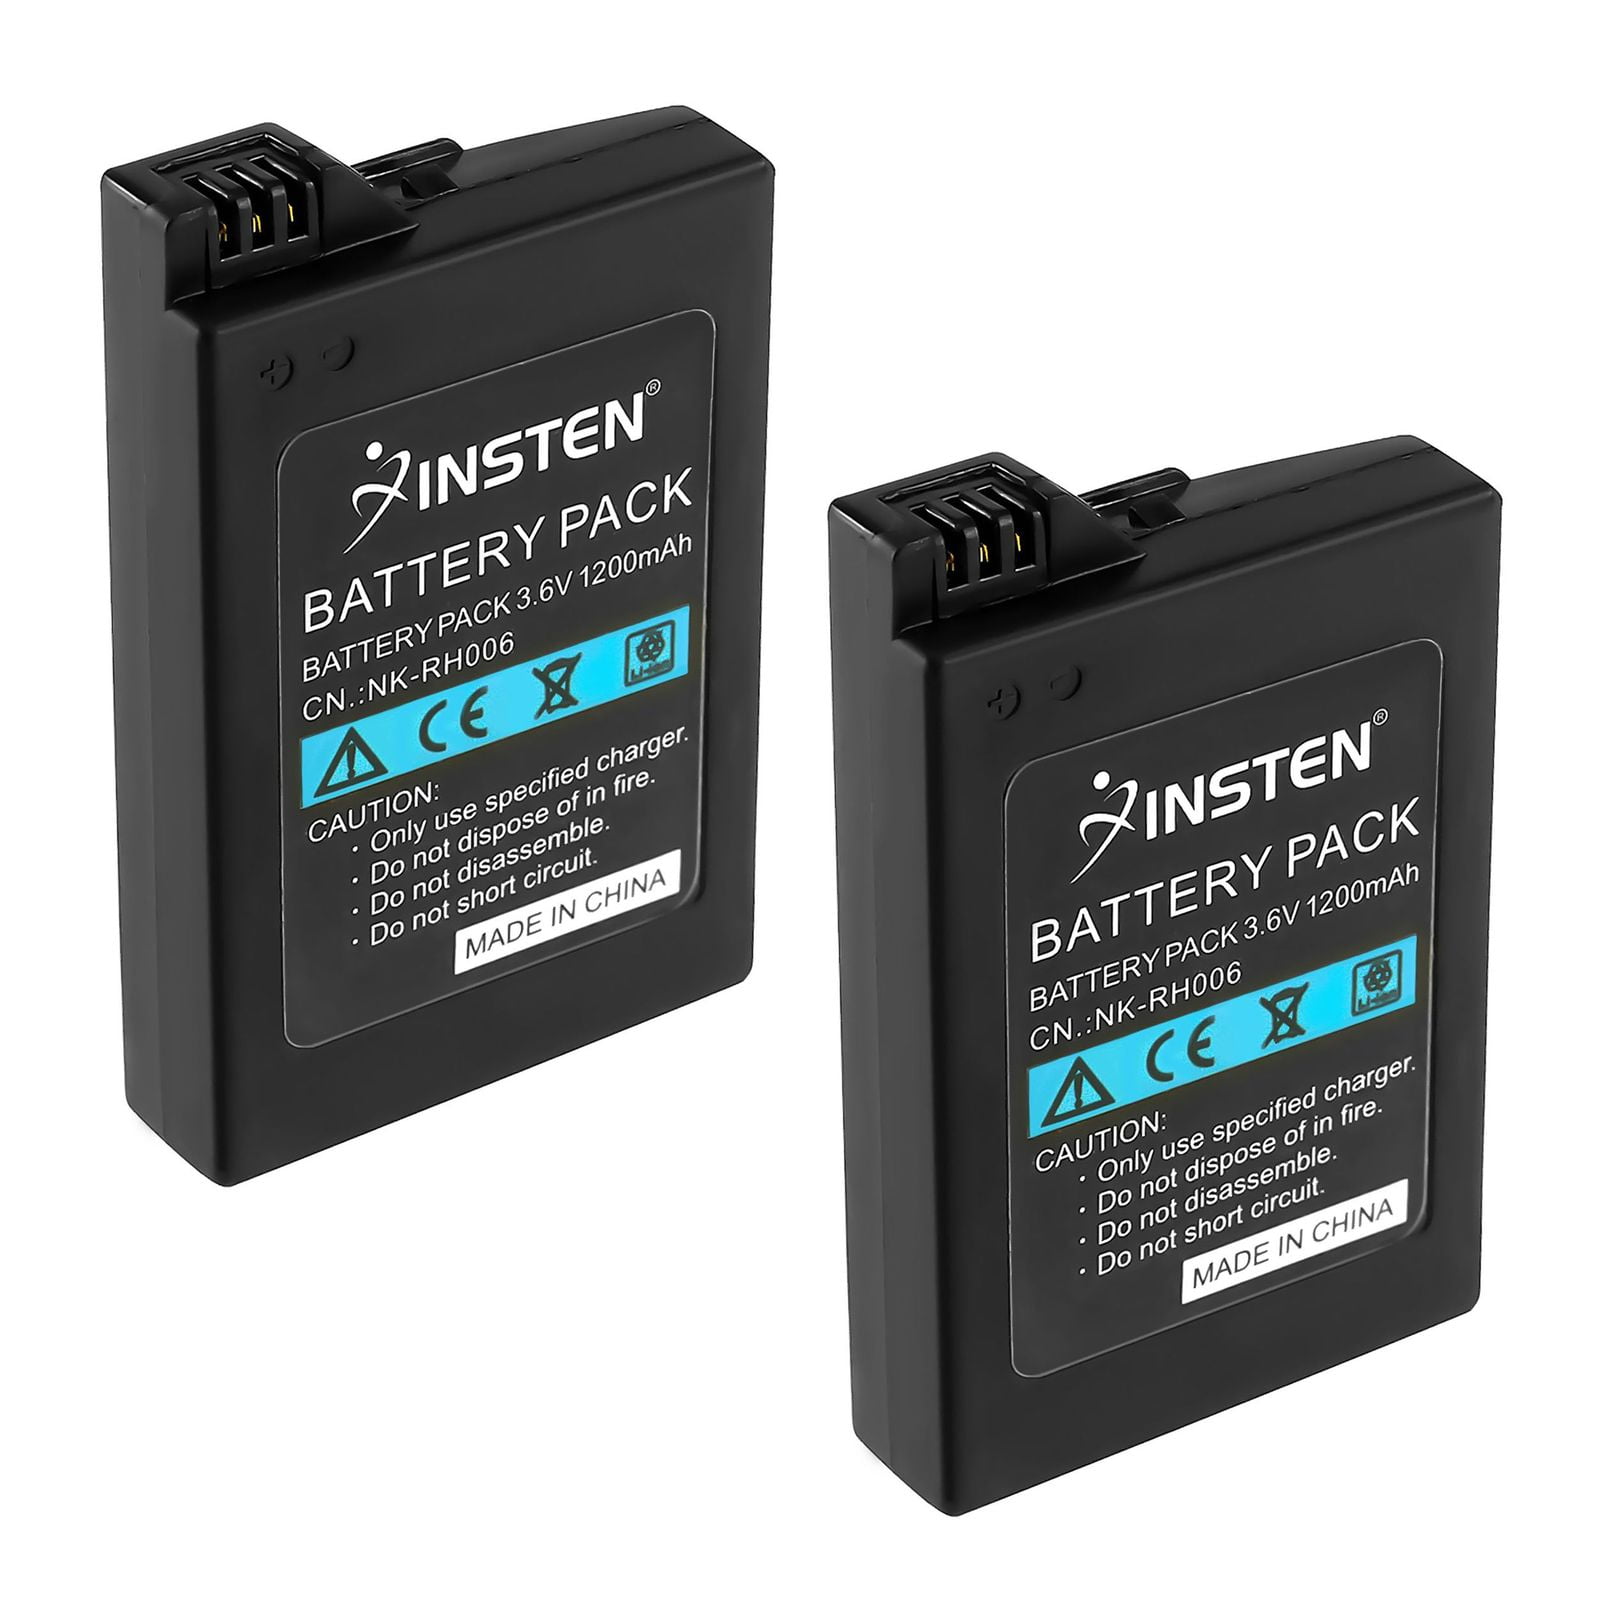 eForCity 2x LITHIUM 3.6V 1800MAH Replacement BATTERY PACK Compatible With SONY PSP 1000 